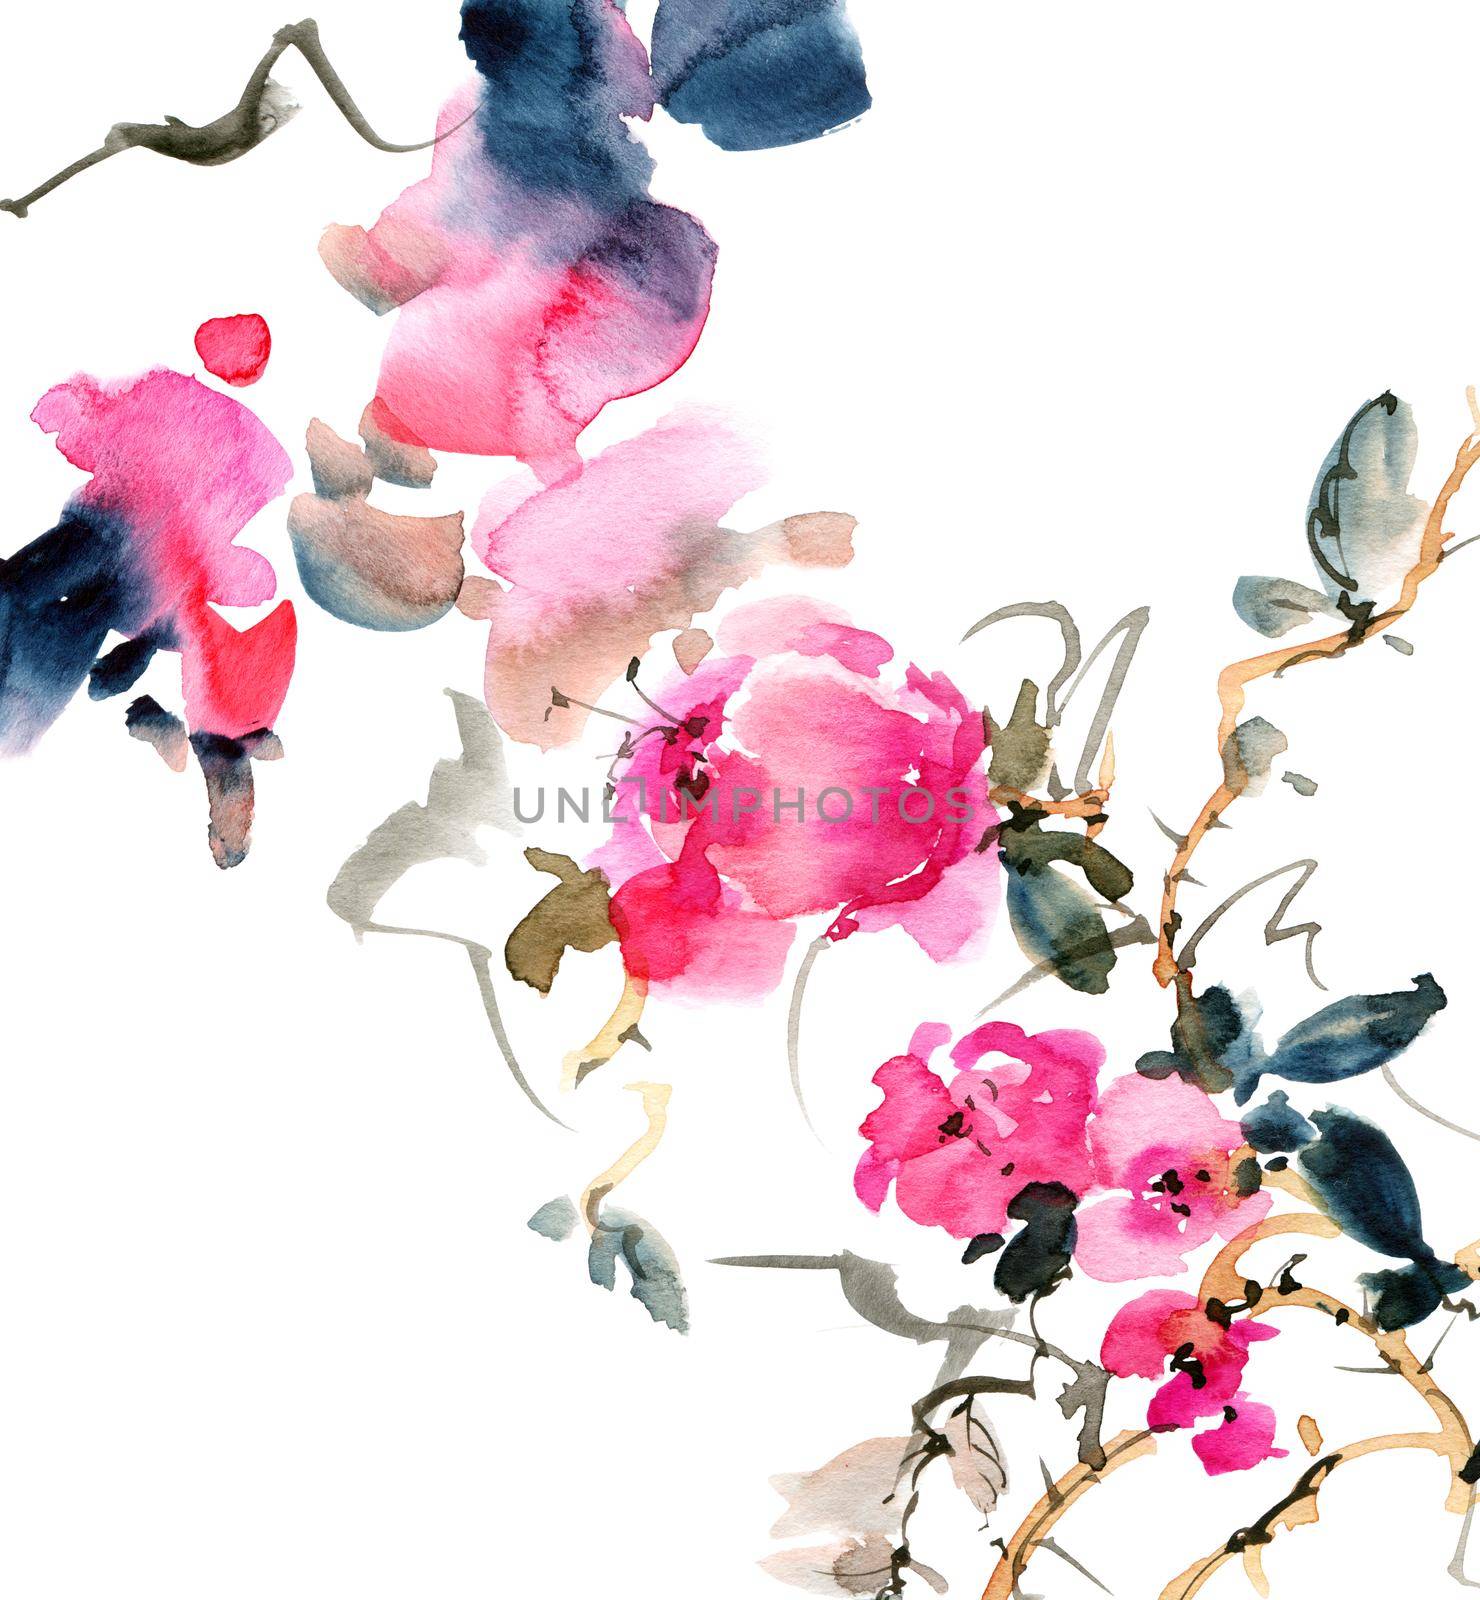 Watercolor and ink illustration of flowers - blossom plant with pink flowers and buds. Sumi-e art.